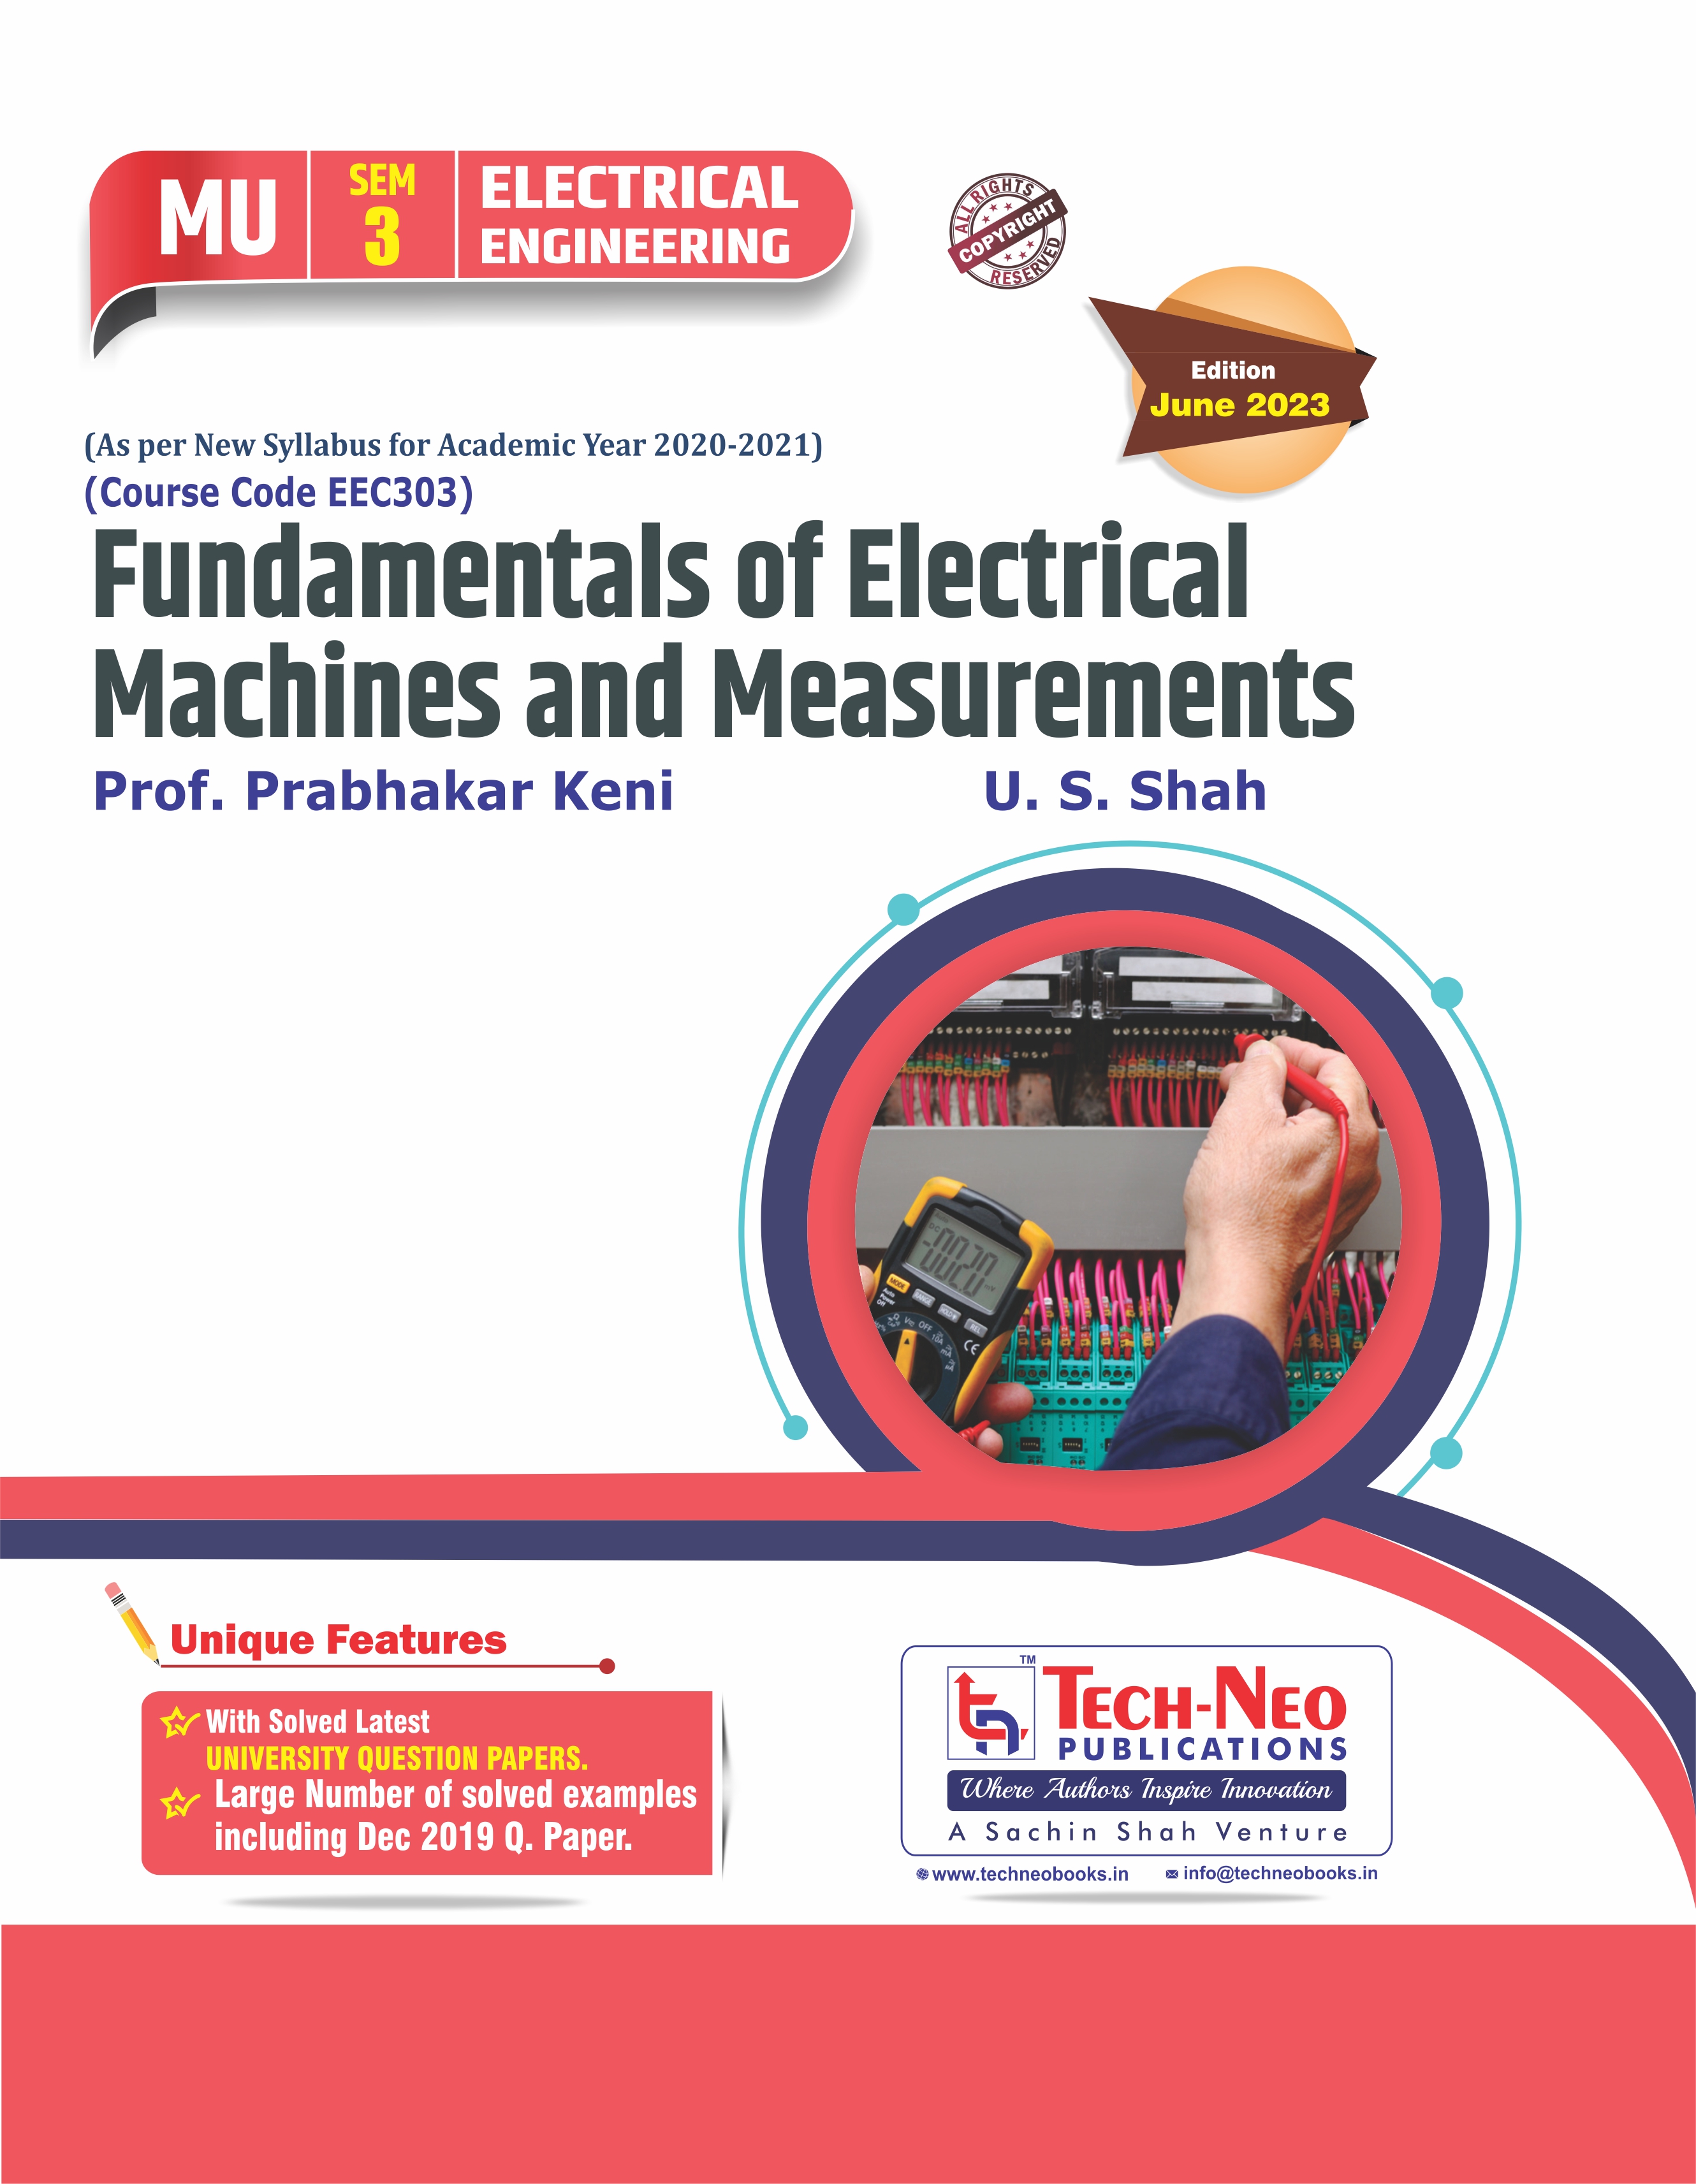 Fundamentals of Electrical Machines and Measurements